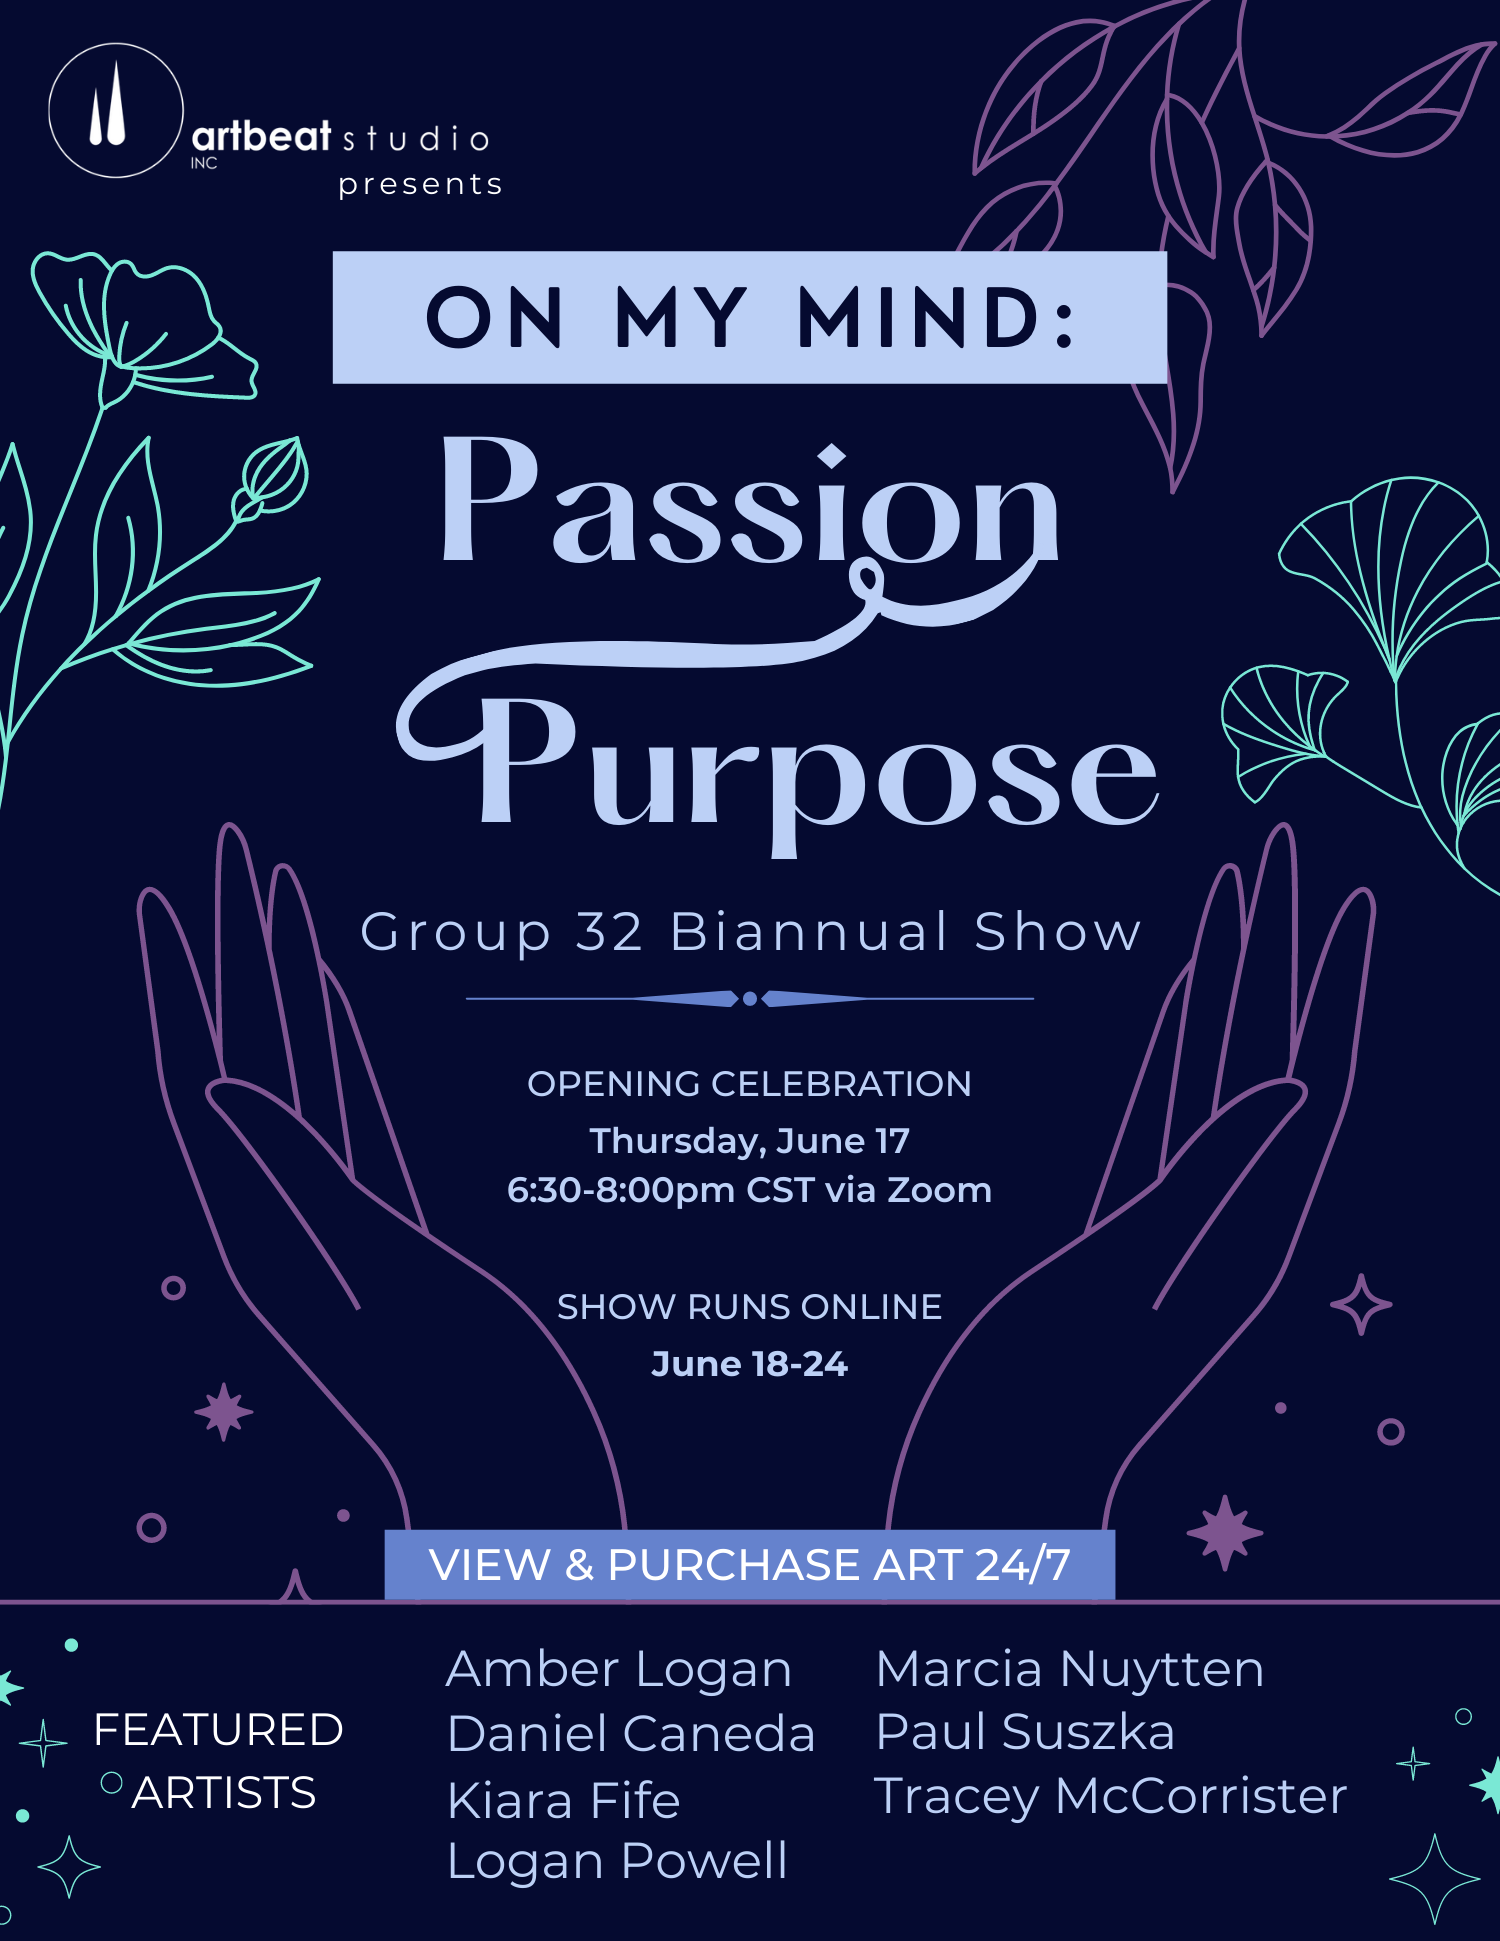 On My Mind: Passion=Purpose event poster